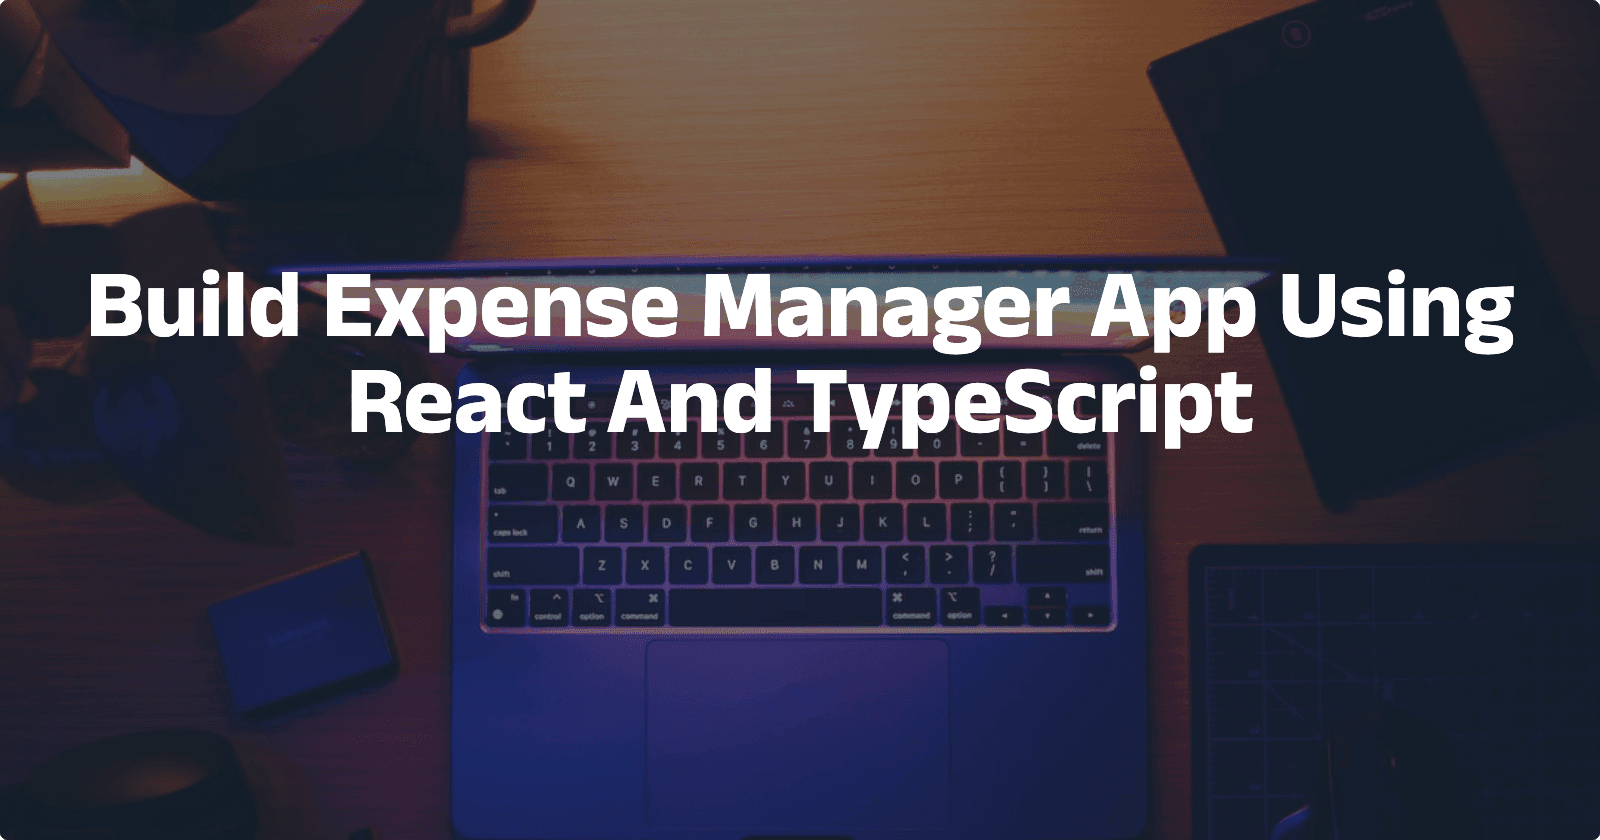 Build Expense Manager App Using React And TypeScript